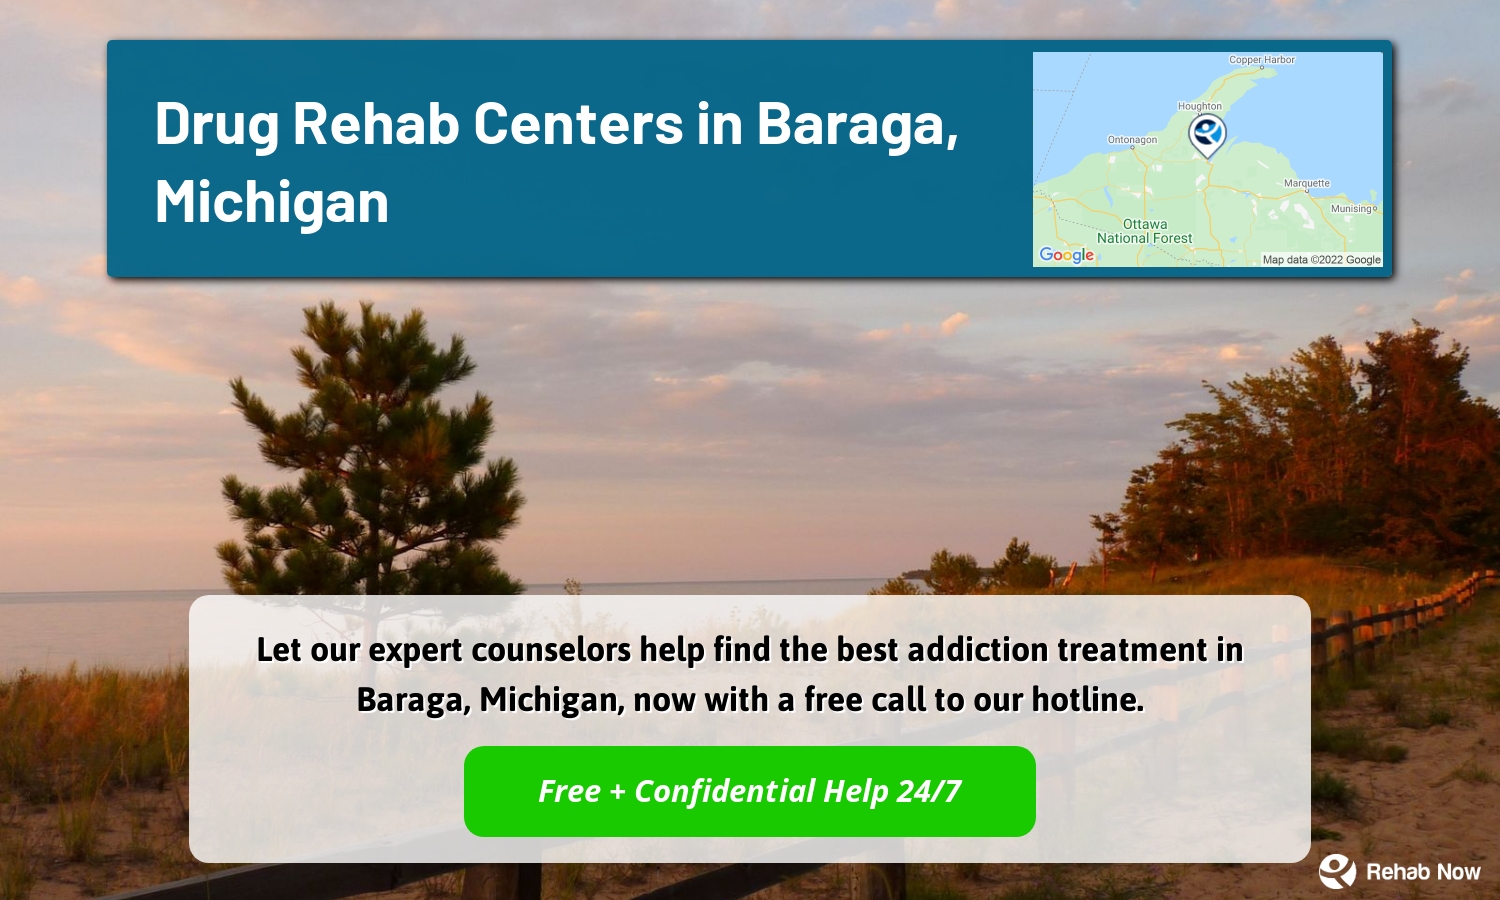 Let our expert counselors help find the best addiction treatment in Baraga, Michigan, now with a free call to our hotline.